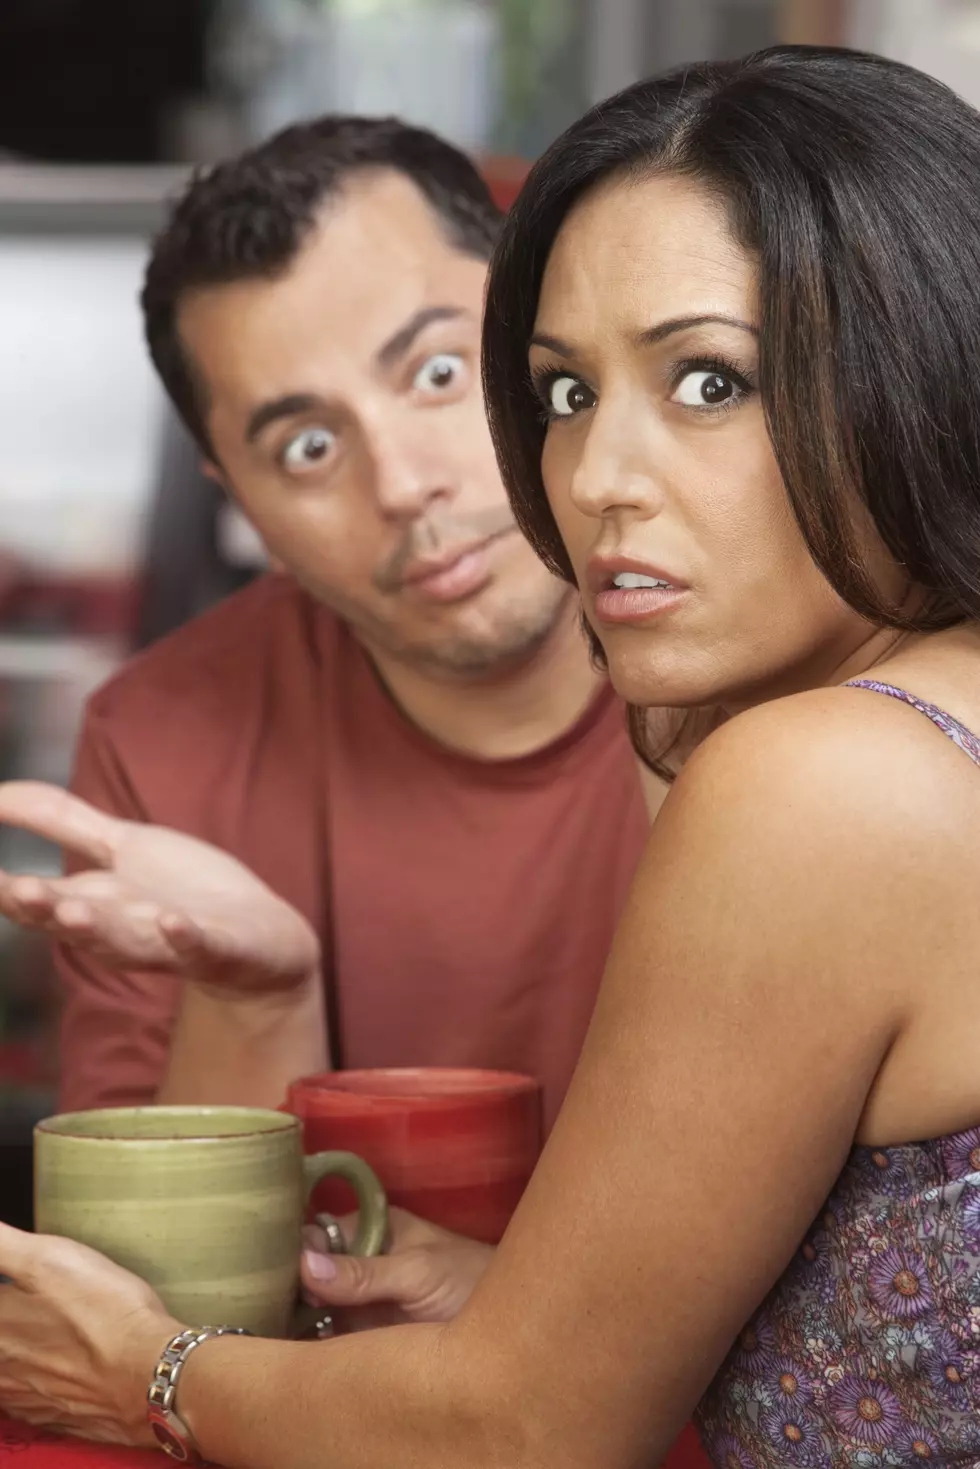 11 Toxic Guys to Cut Out of Your Life